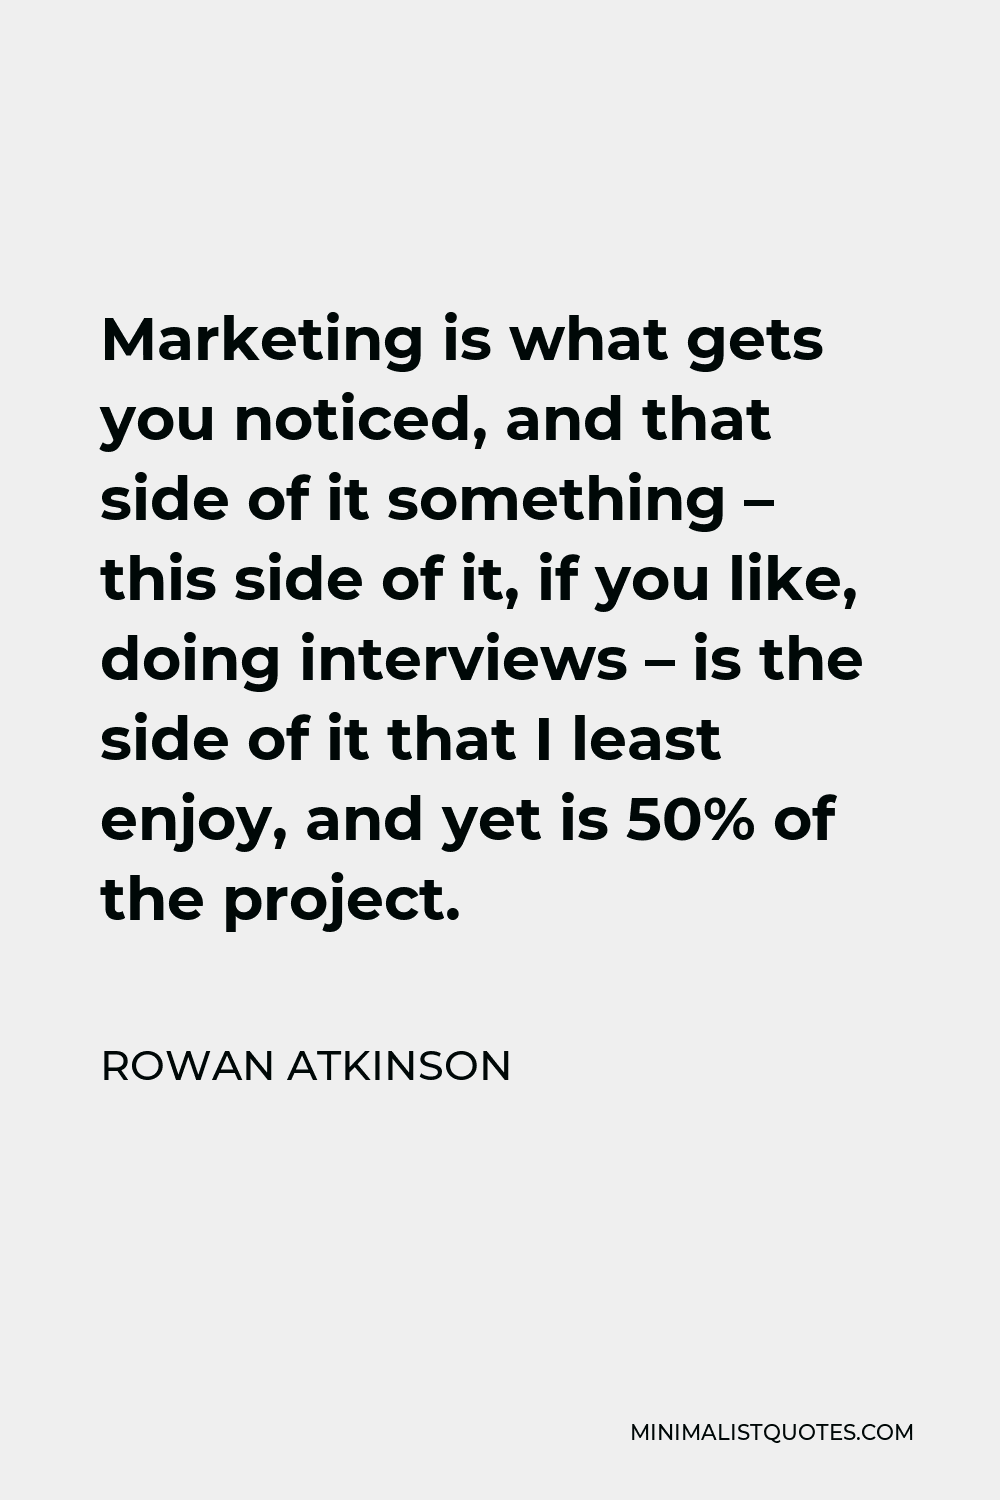 Rowan Atkinson Quote - Marketing is what gets you noticed, and that side of it something – this side of it, if you like, doing interviews – is the side of it that I least enjoy, and yet is 50% of the project.